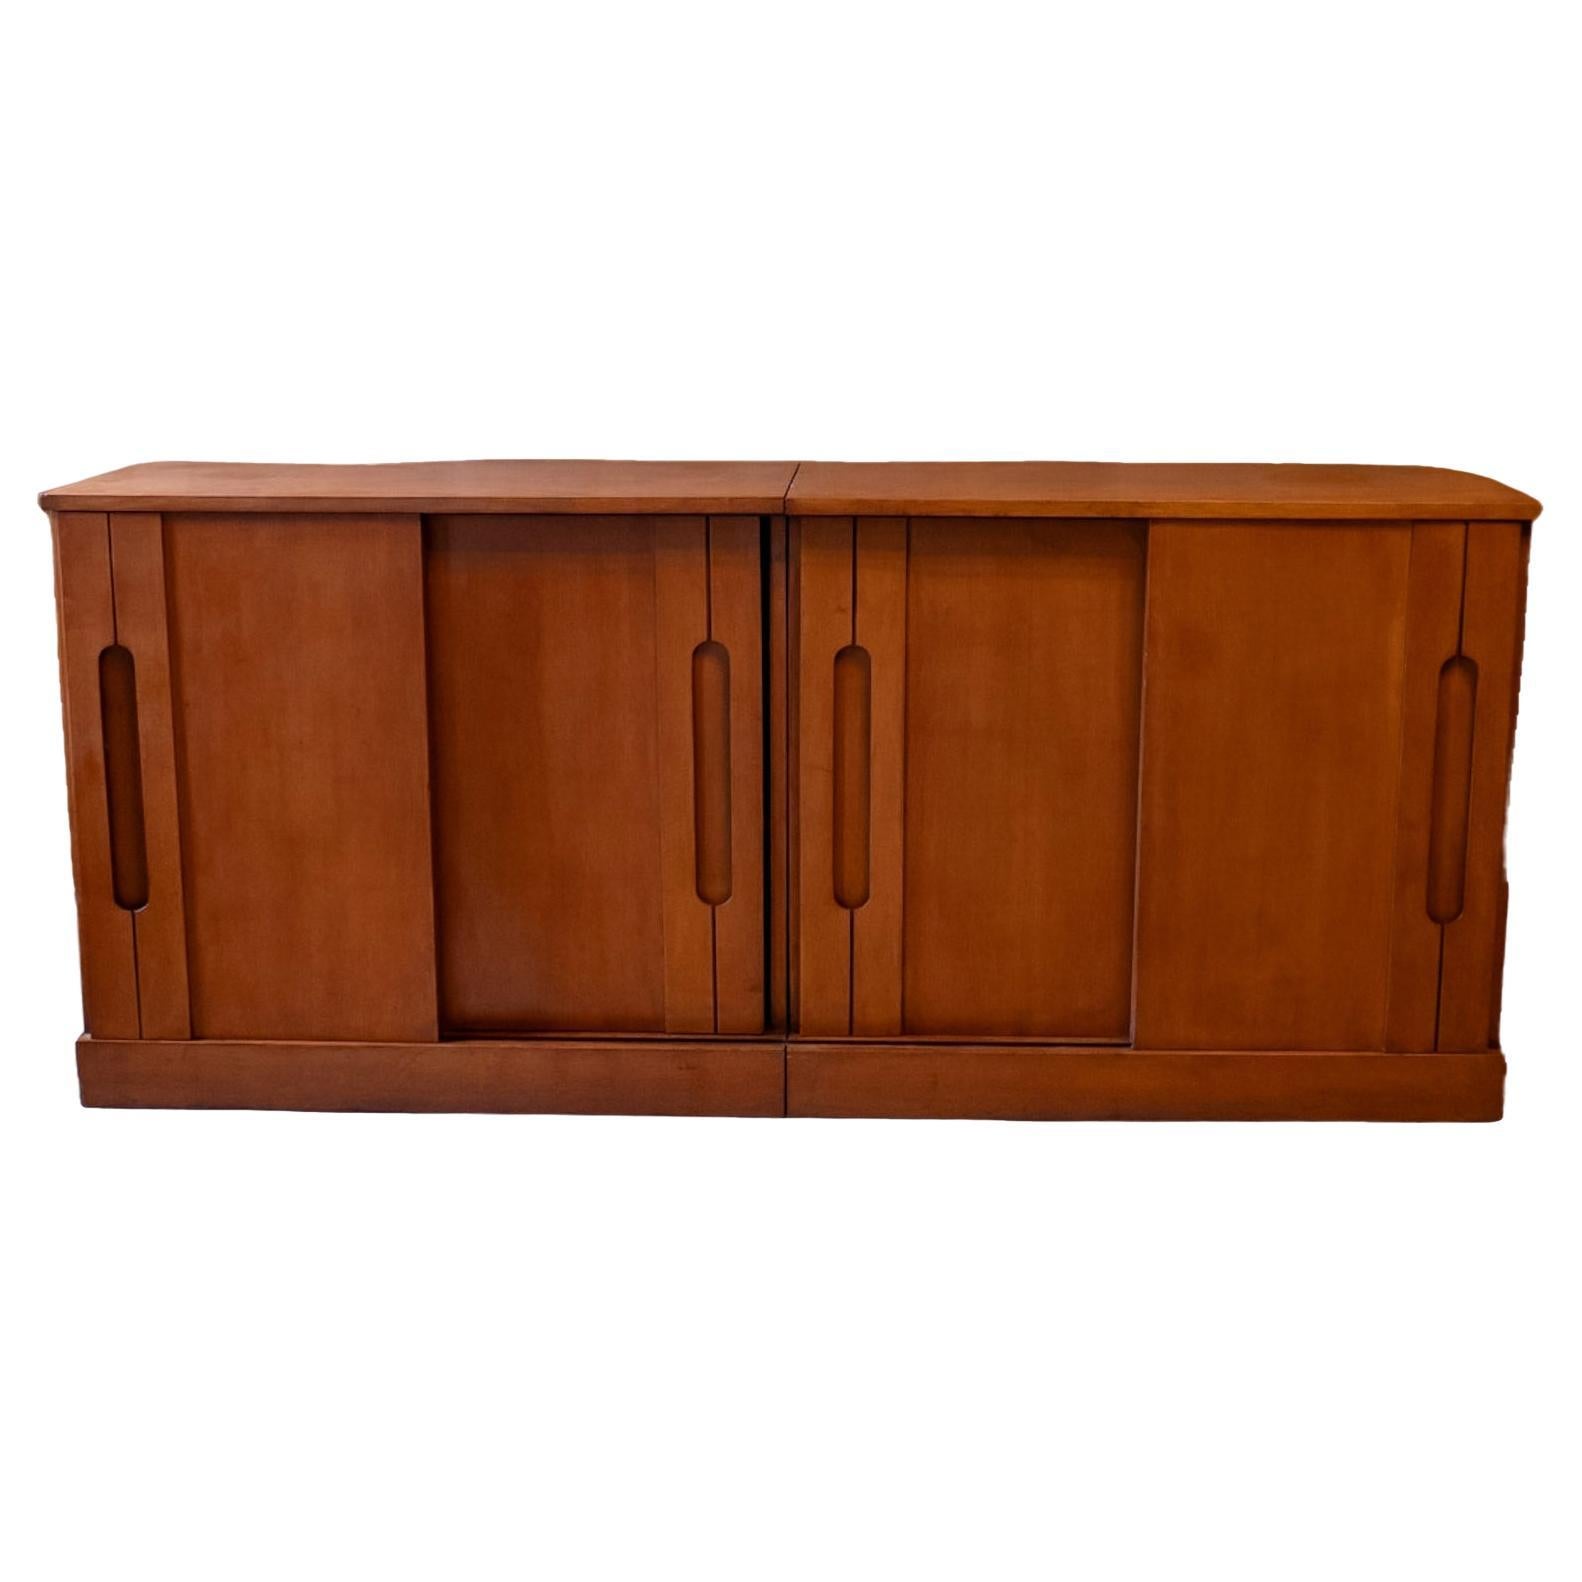 Mid-Century Modern Wooden Sideboard by Achilli, Bridigini and Canella, 1960s